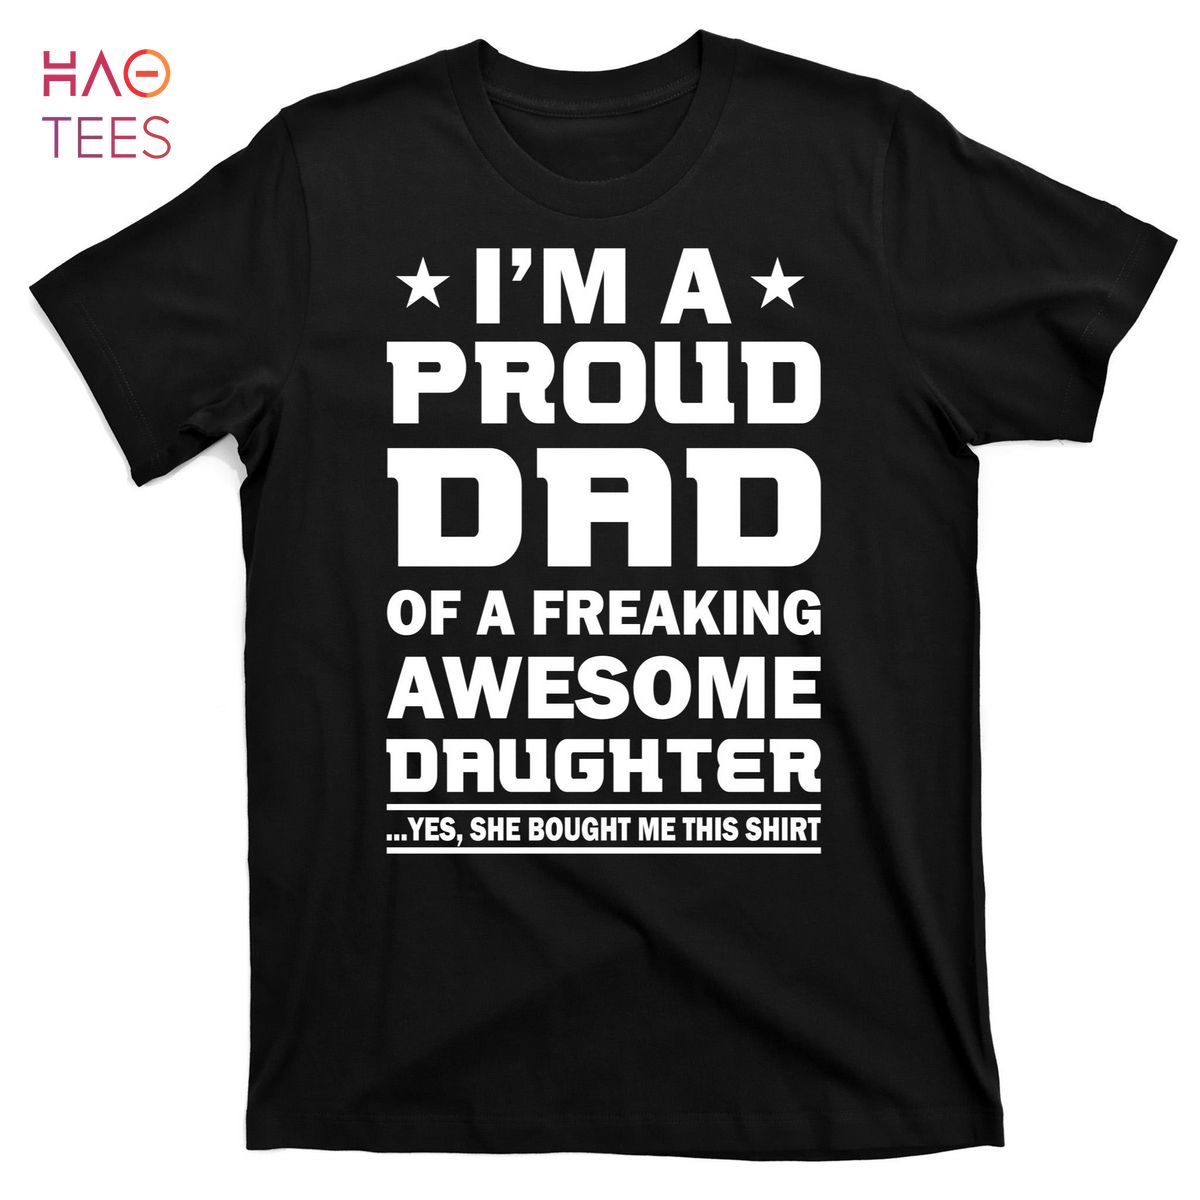 HOT I'm A Proud Dad Of A Freaking Awesome Daughter T-Shirts